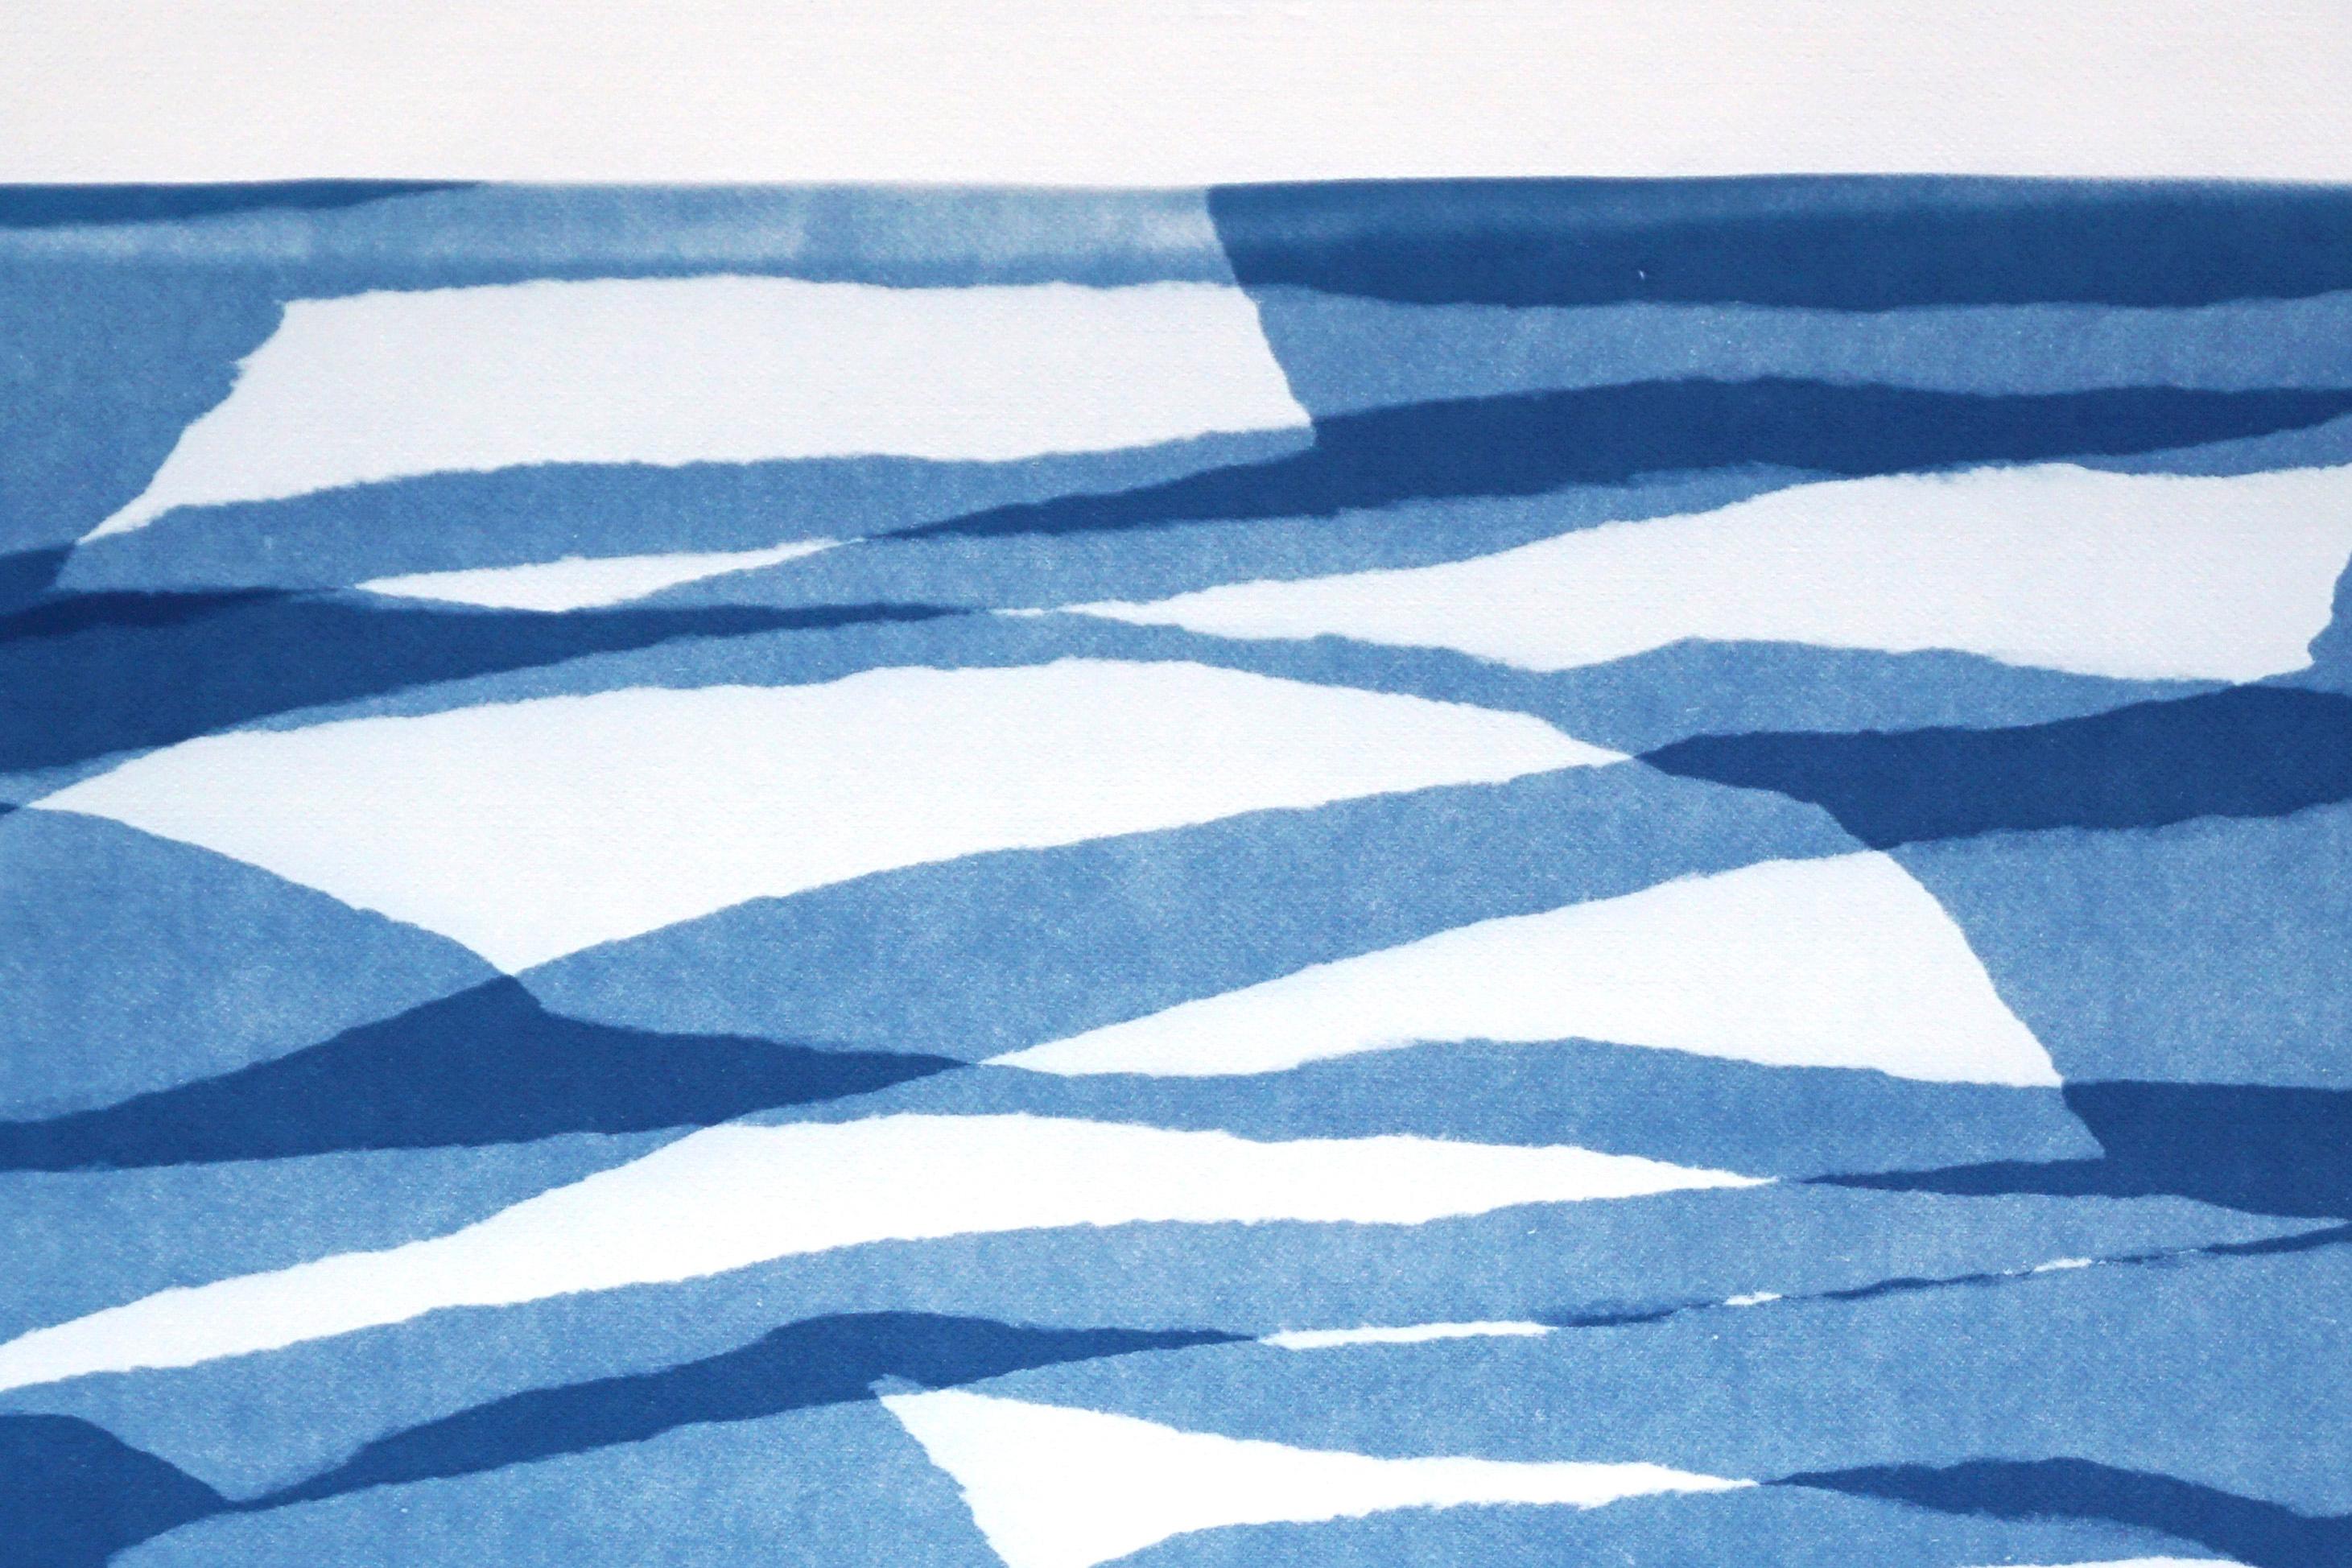 This is an exclusive handprinted unique cyanotype that takes its inspiration from the mid-century modern shapes.
It's made by layering paper cutouts and different exposures using uv-light. 

Details:
+ Title: Layered Torn Paper III
+ Year: 2022
+